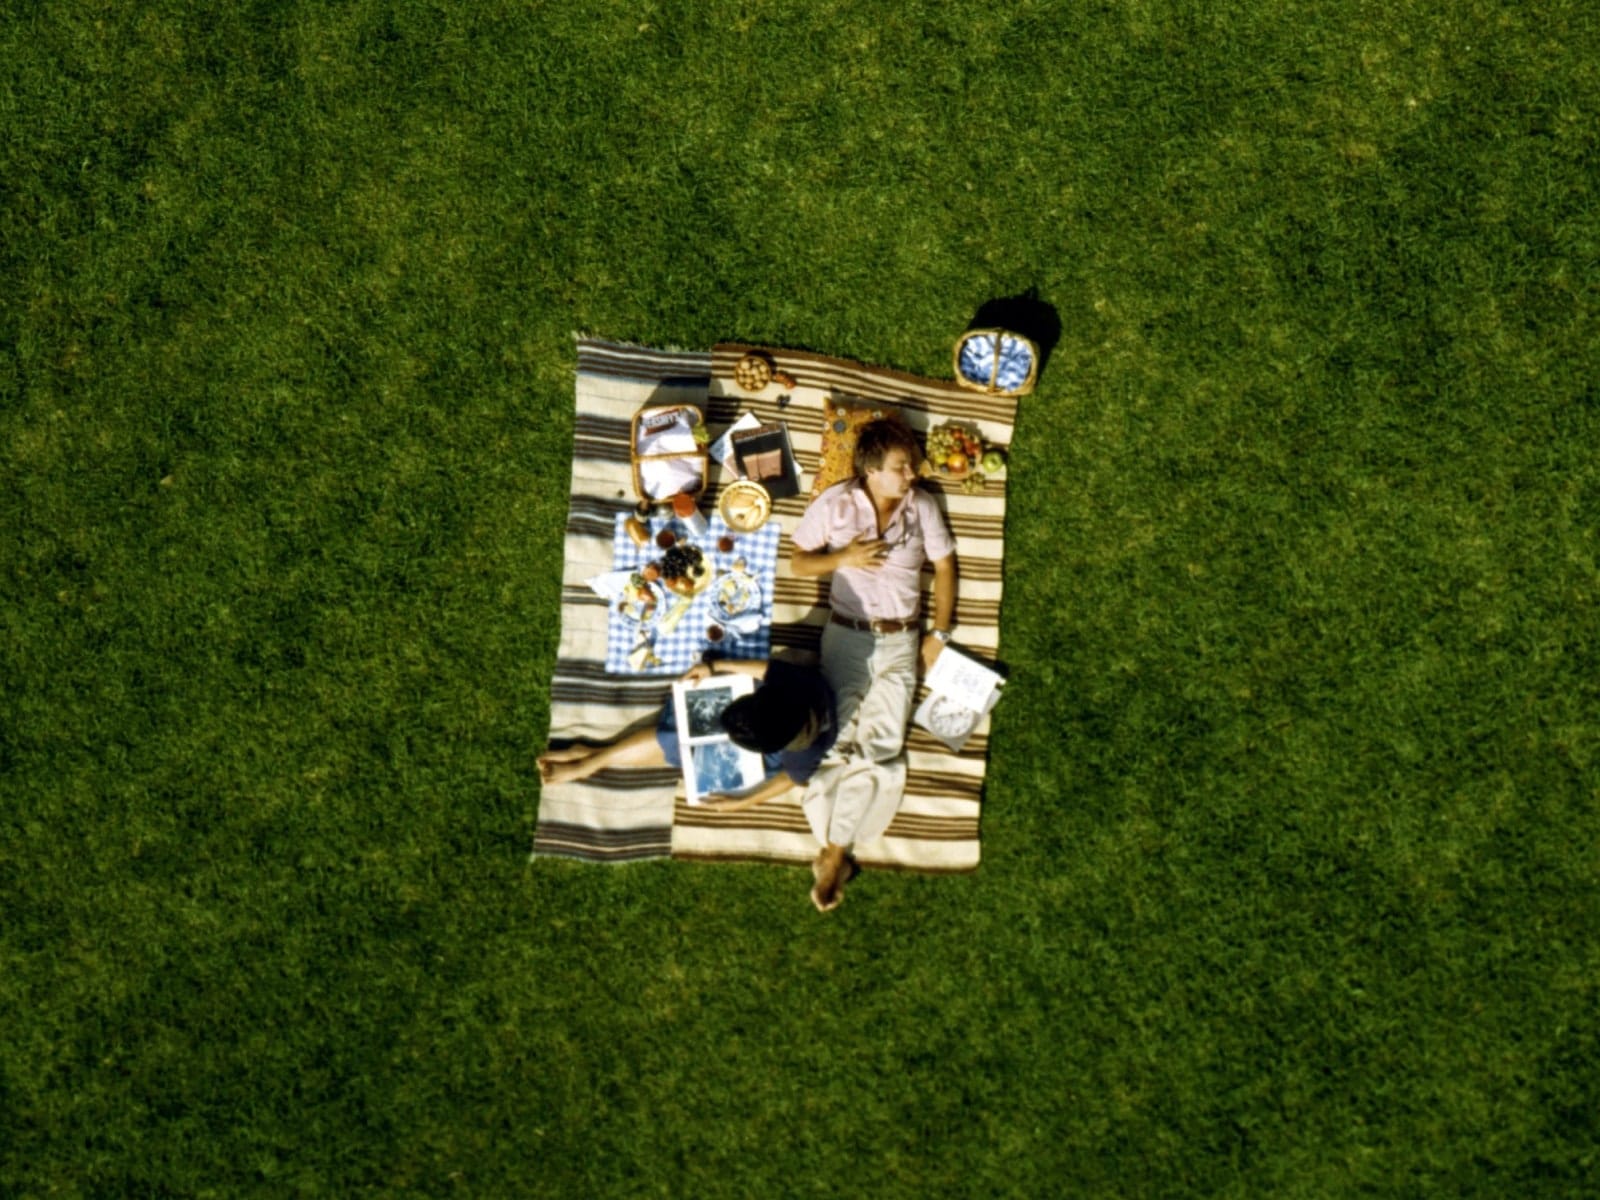 An overhead shot of a man and woman laying on a striped blanket with picnic food on green grass.